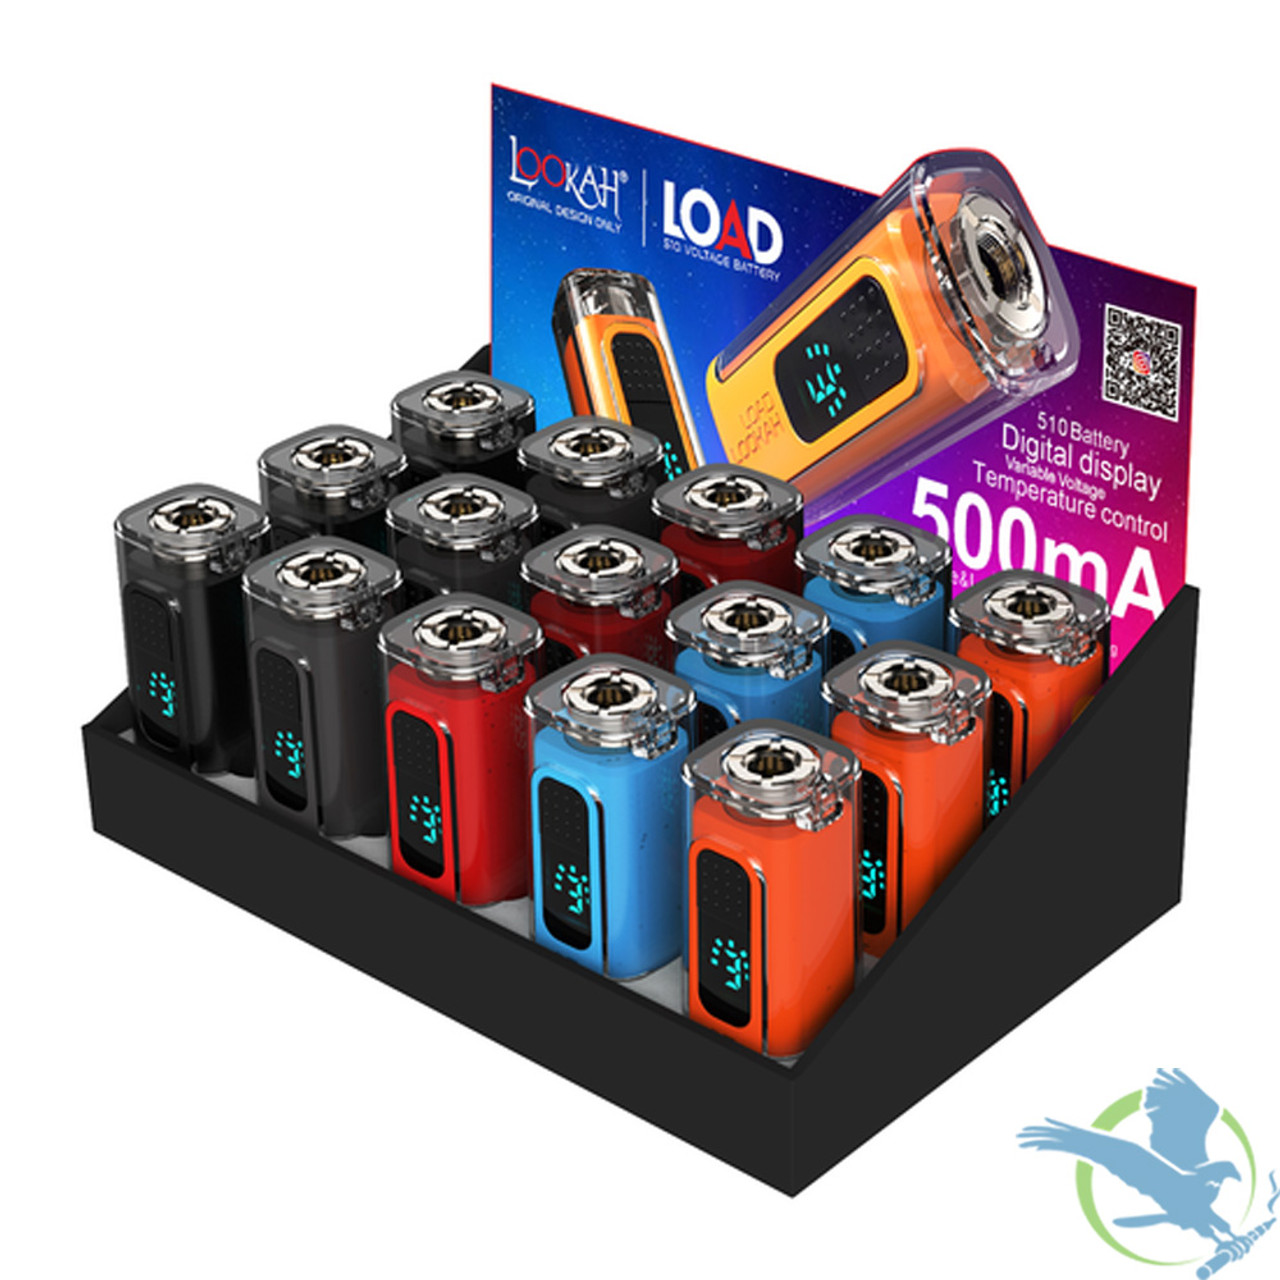 Lookah Load 510 500mAh Variable Voltage Vape Pen Battery - Assorted Colors  - Display of 25, Pen Style Battery